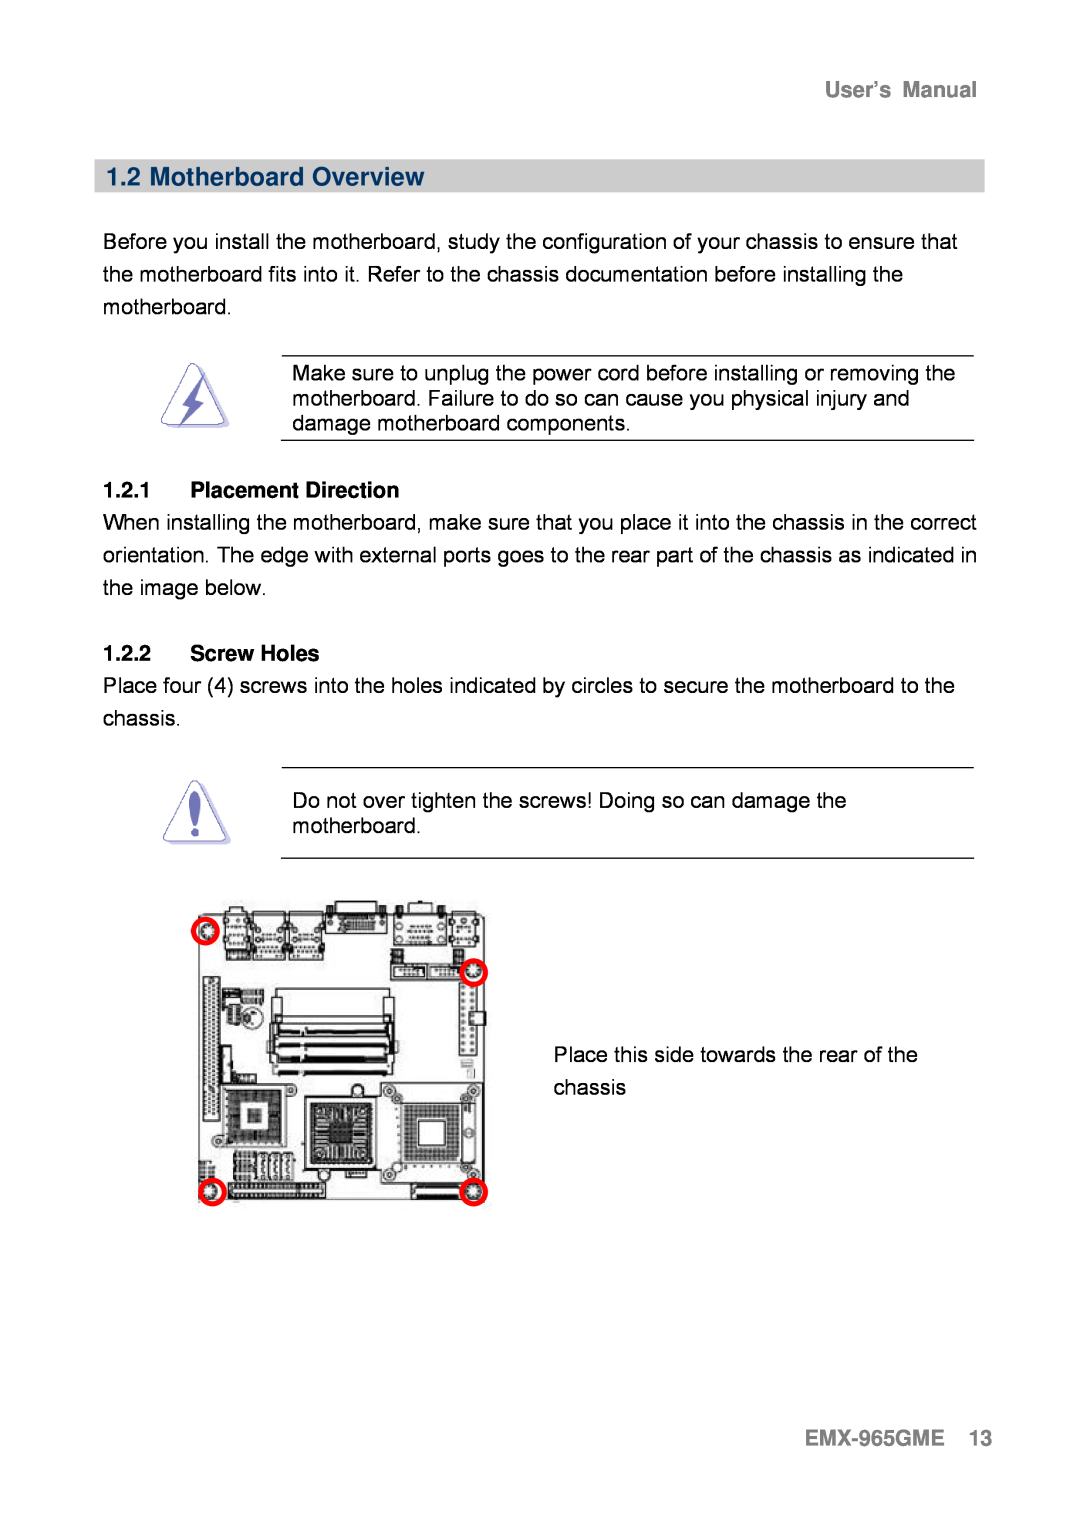 Intel user manual Motherboard Overview, 1.2.1Placement Direction, 1.2.2Screw Holes, EMX-965GME13, User’s Manual 